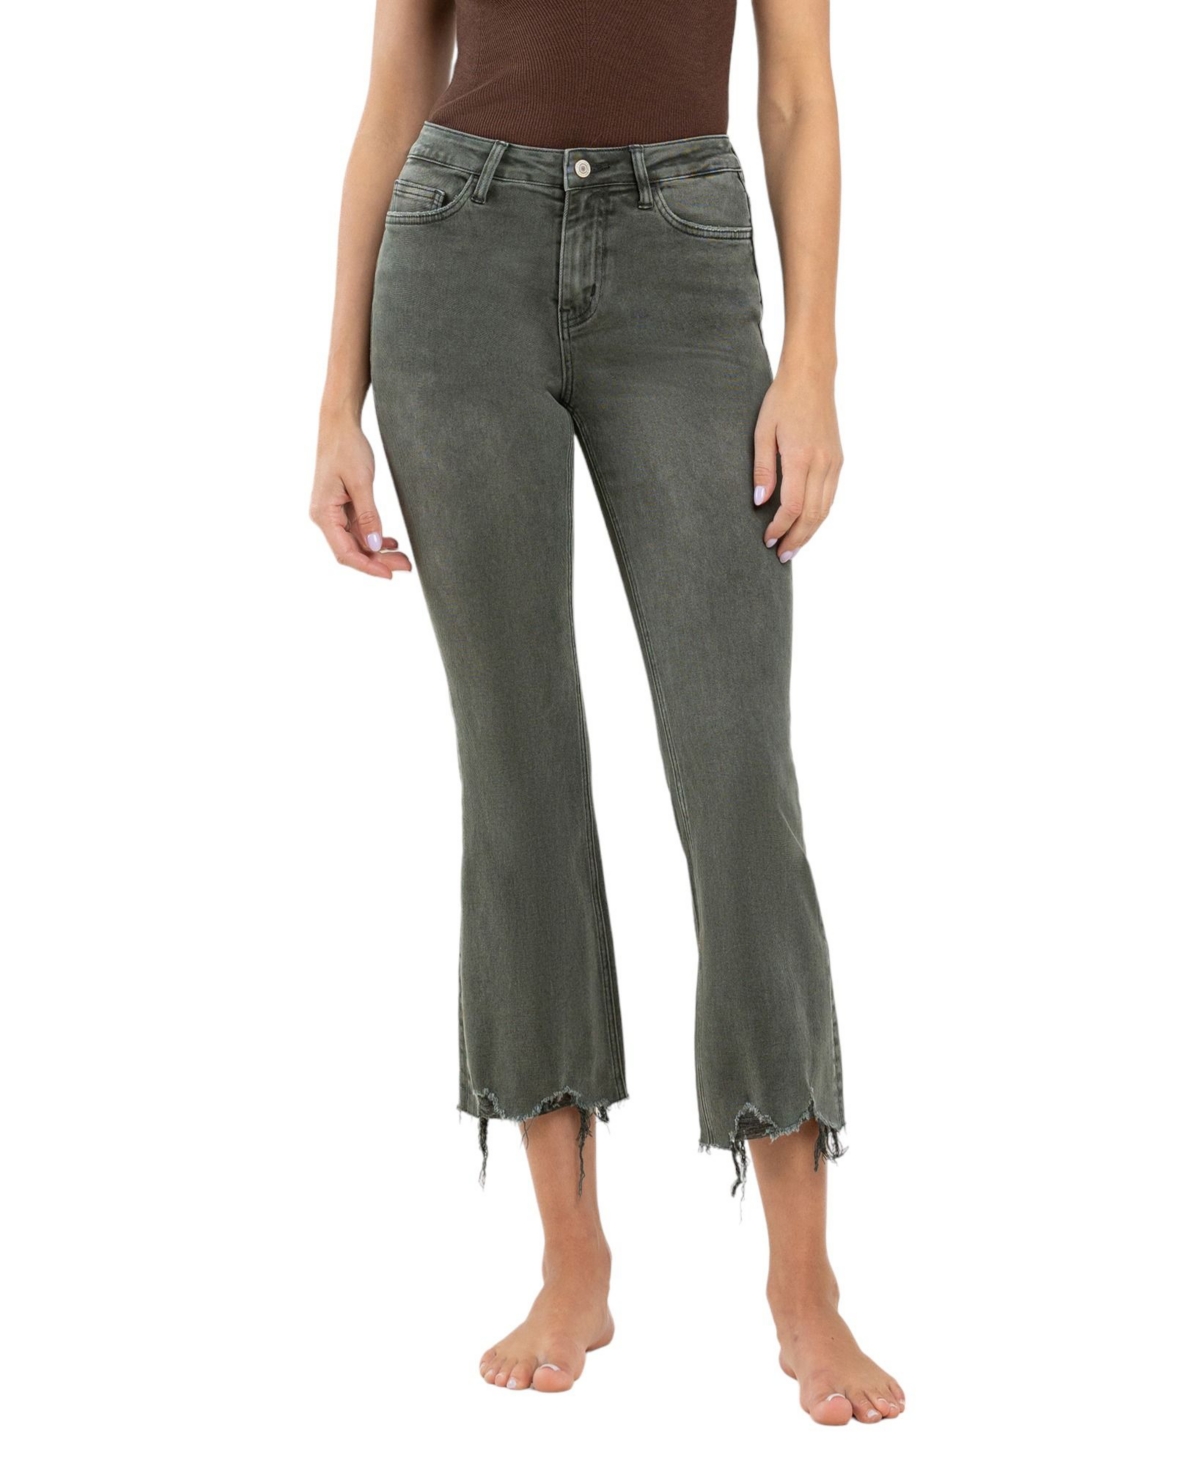 Women's High Rise Cropped Flare Jeans - Deep forest green